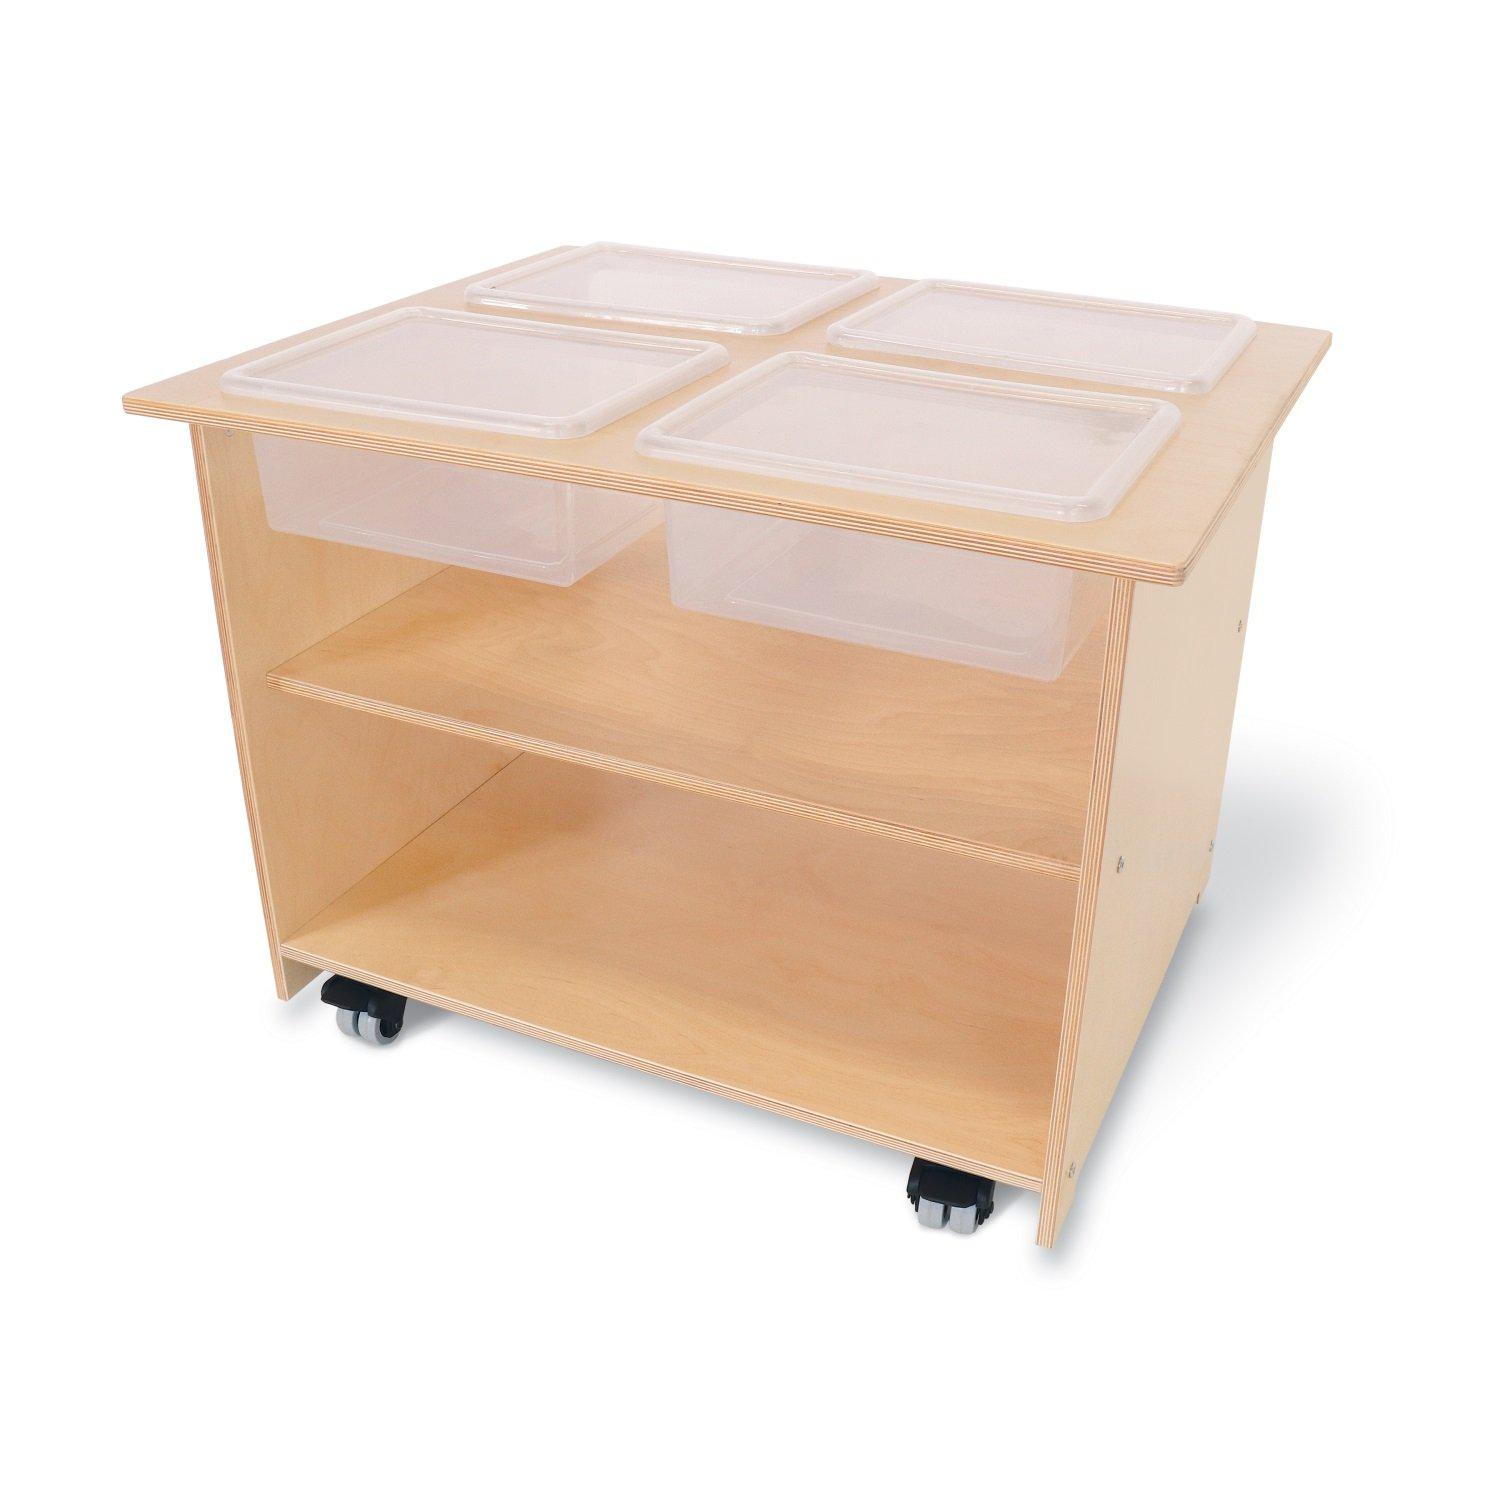 Deluxe Mobile Sensory Table With Trays And Lids